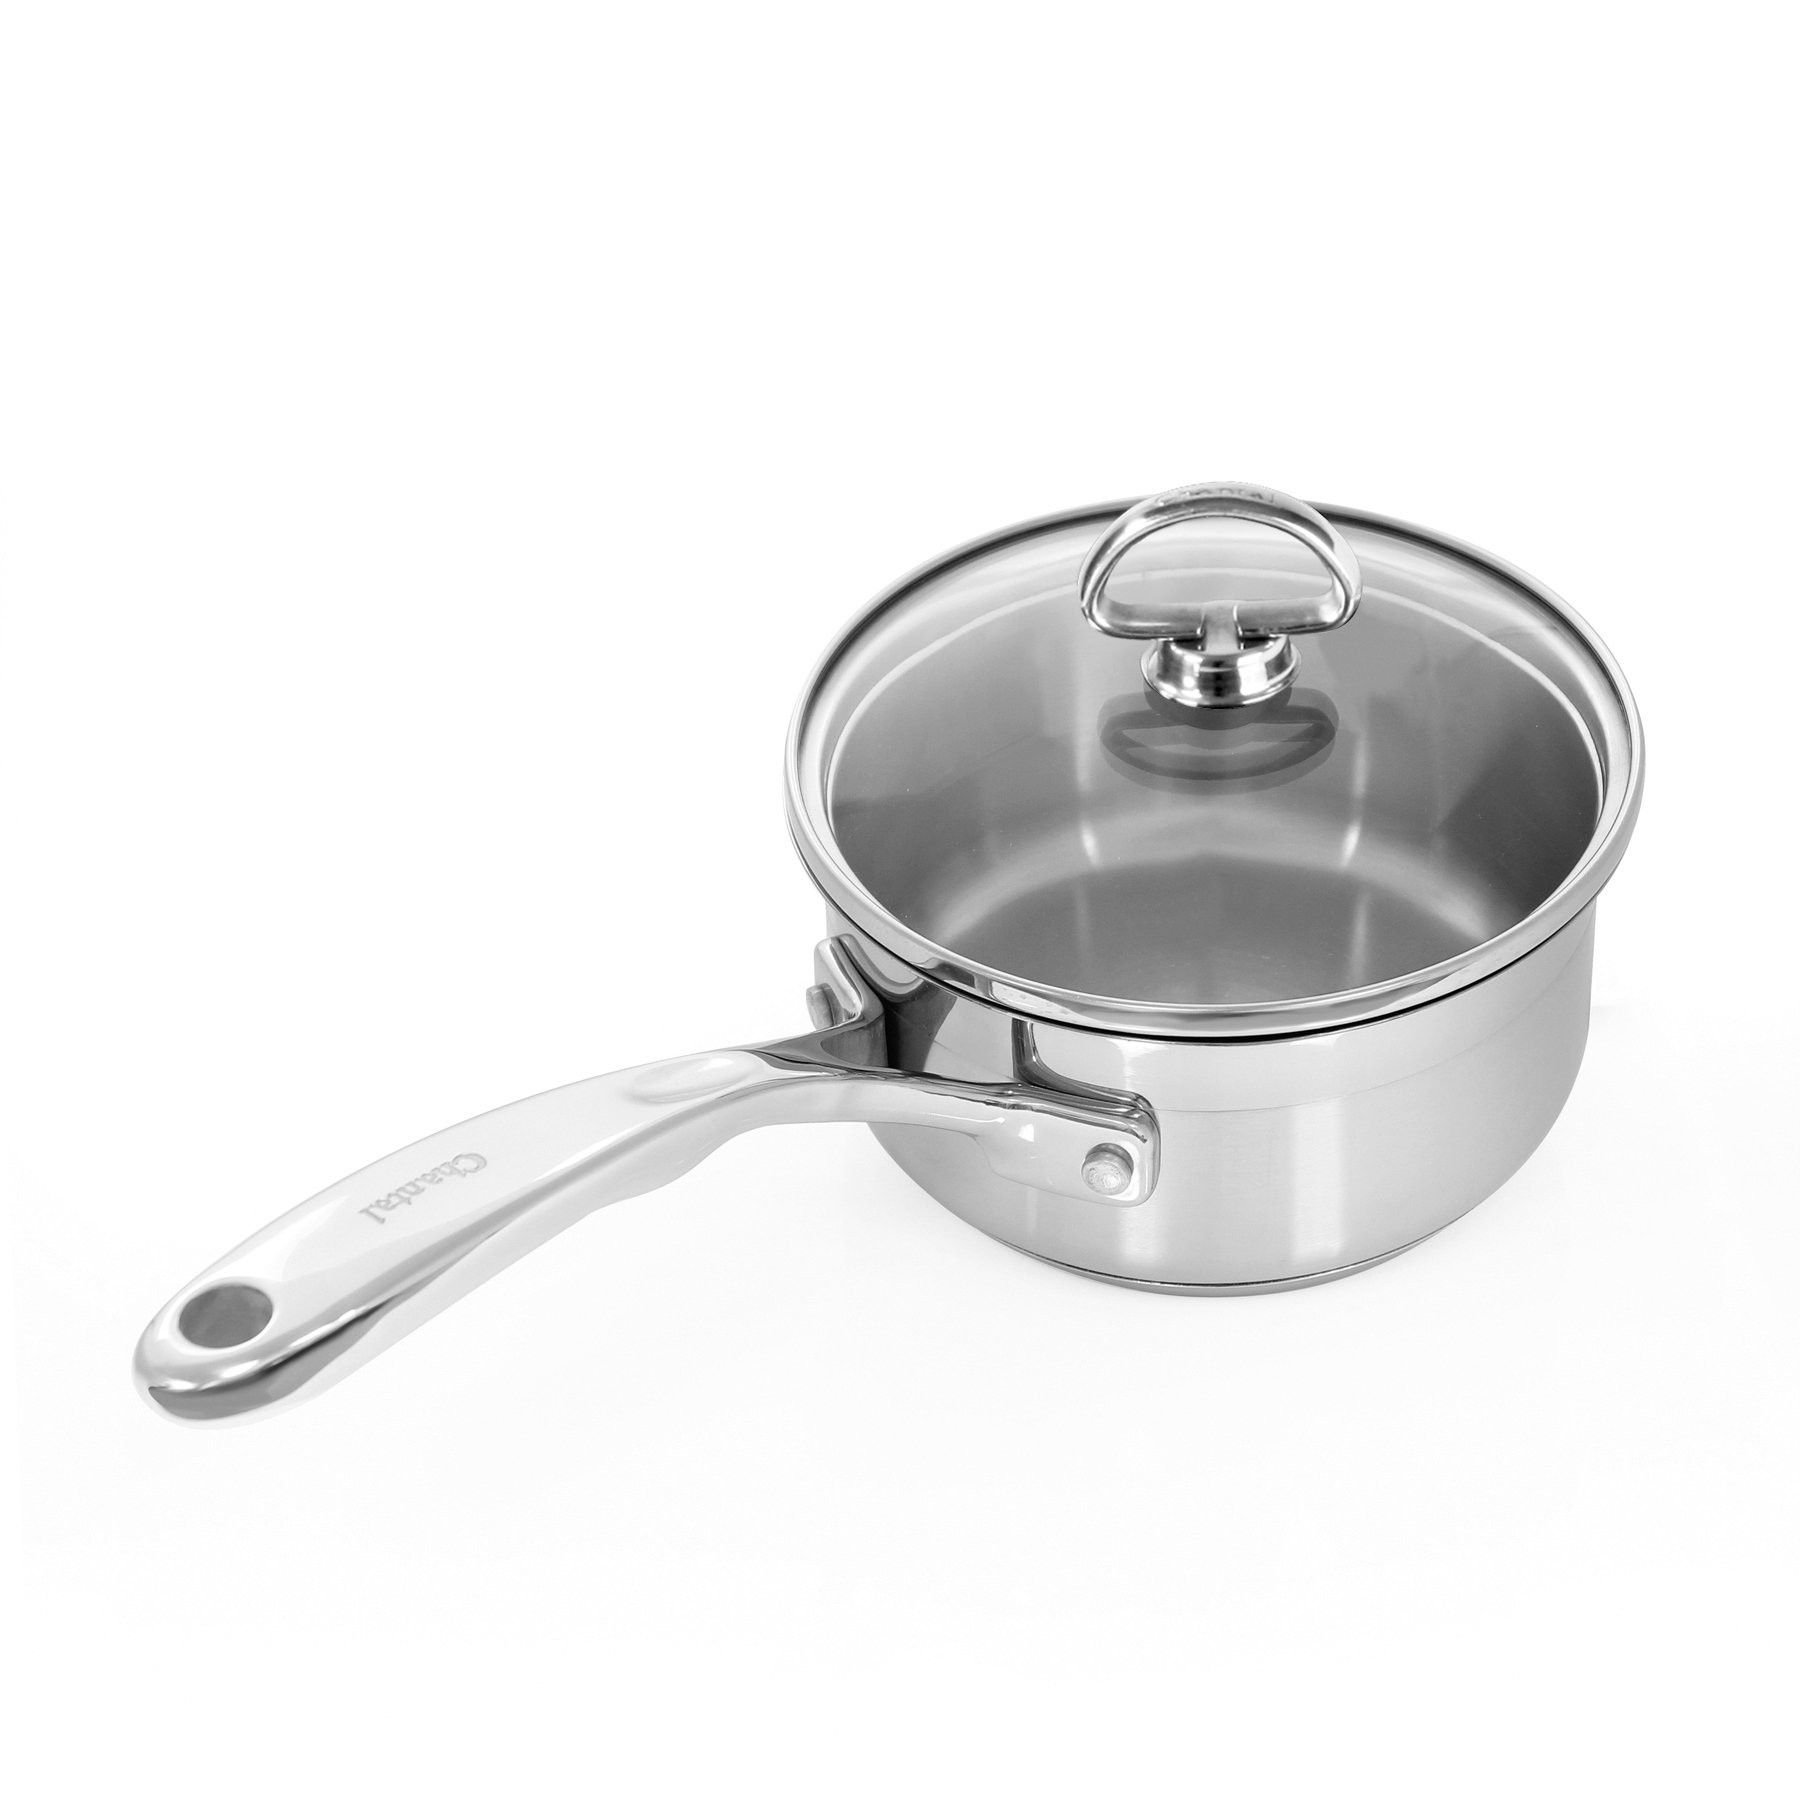 SAFINOX 18/10 Stainless Steel Tri-Ply Thermo Capsulated Bottom 3-Quart Sauce Pan with Glass Lid Dishwasher Safe Induction Ready 